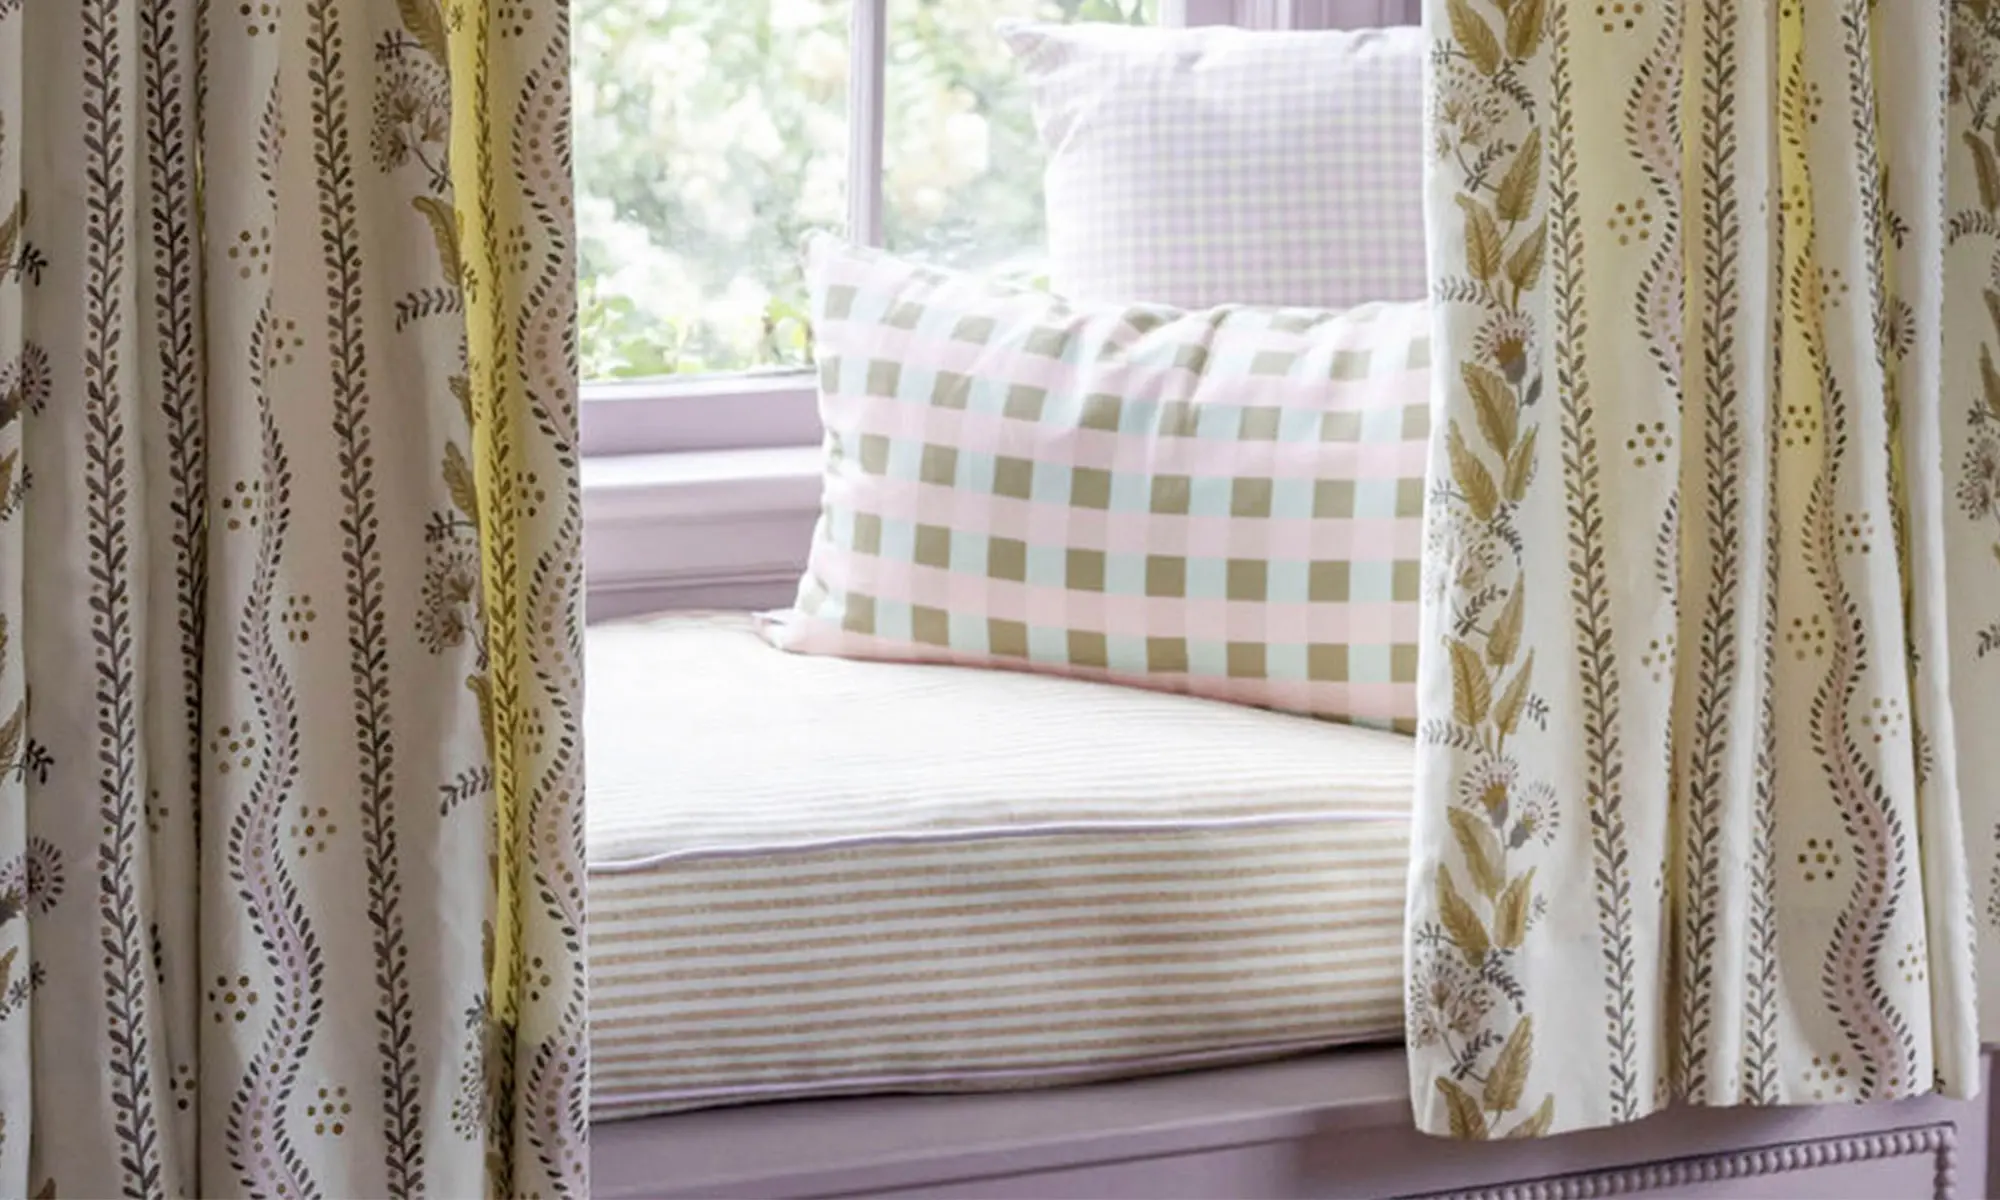 Window seat with pillows and curtains.